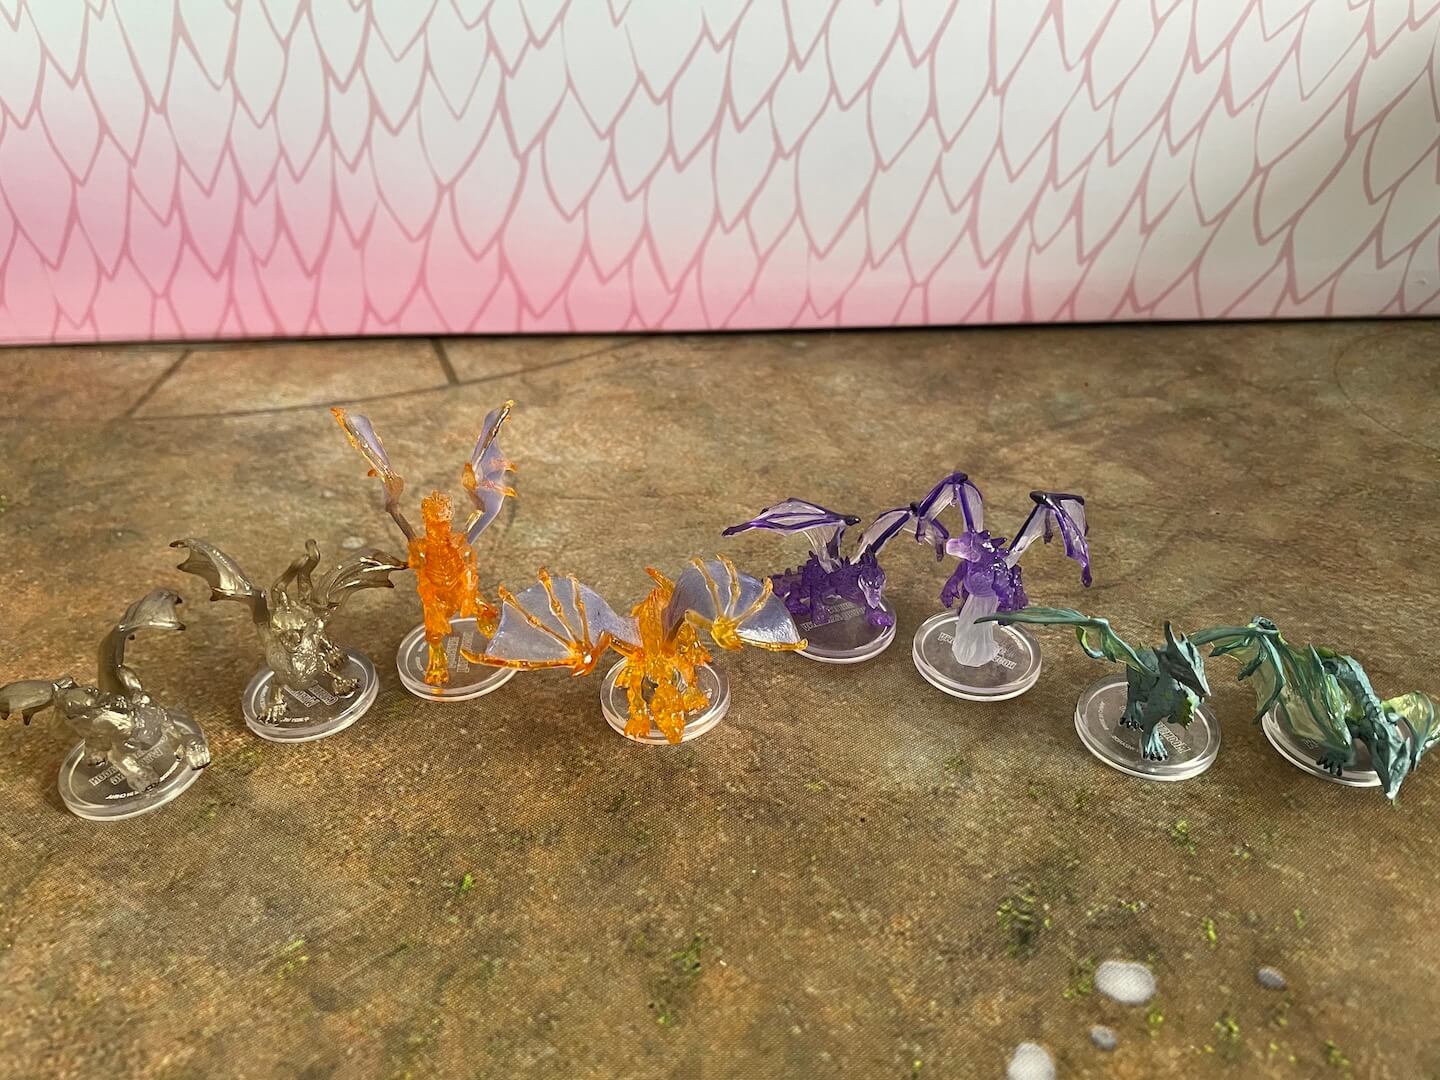 Promotional minis from Fizban's Treasury of Dragons Collector's Box